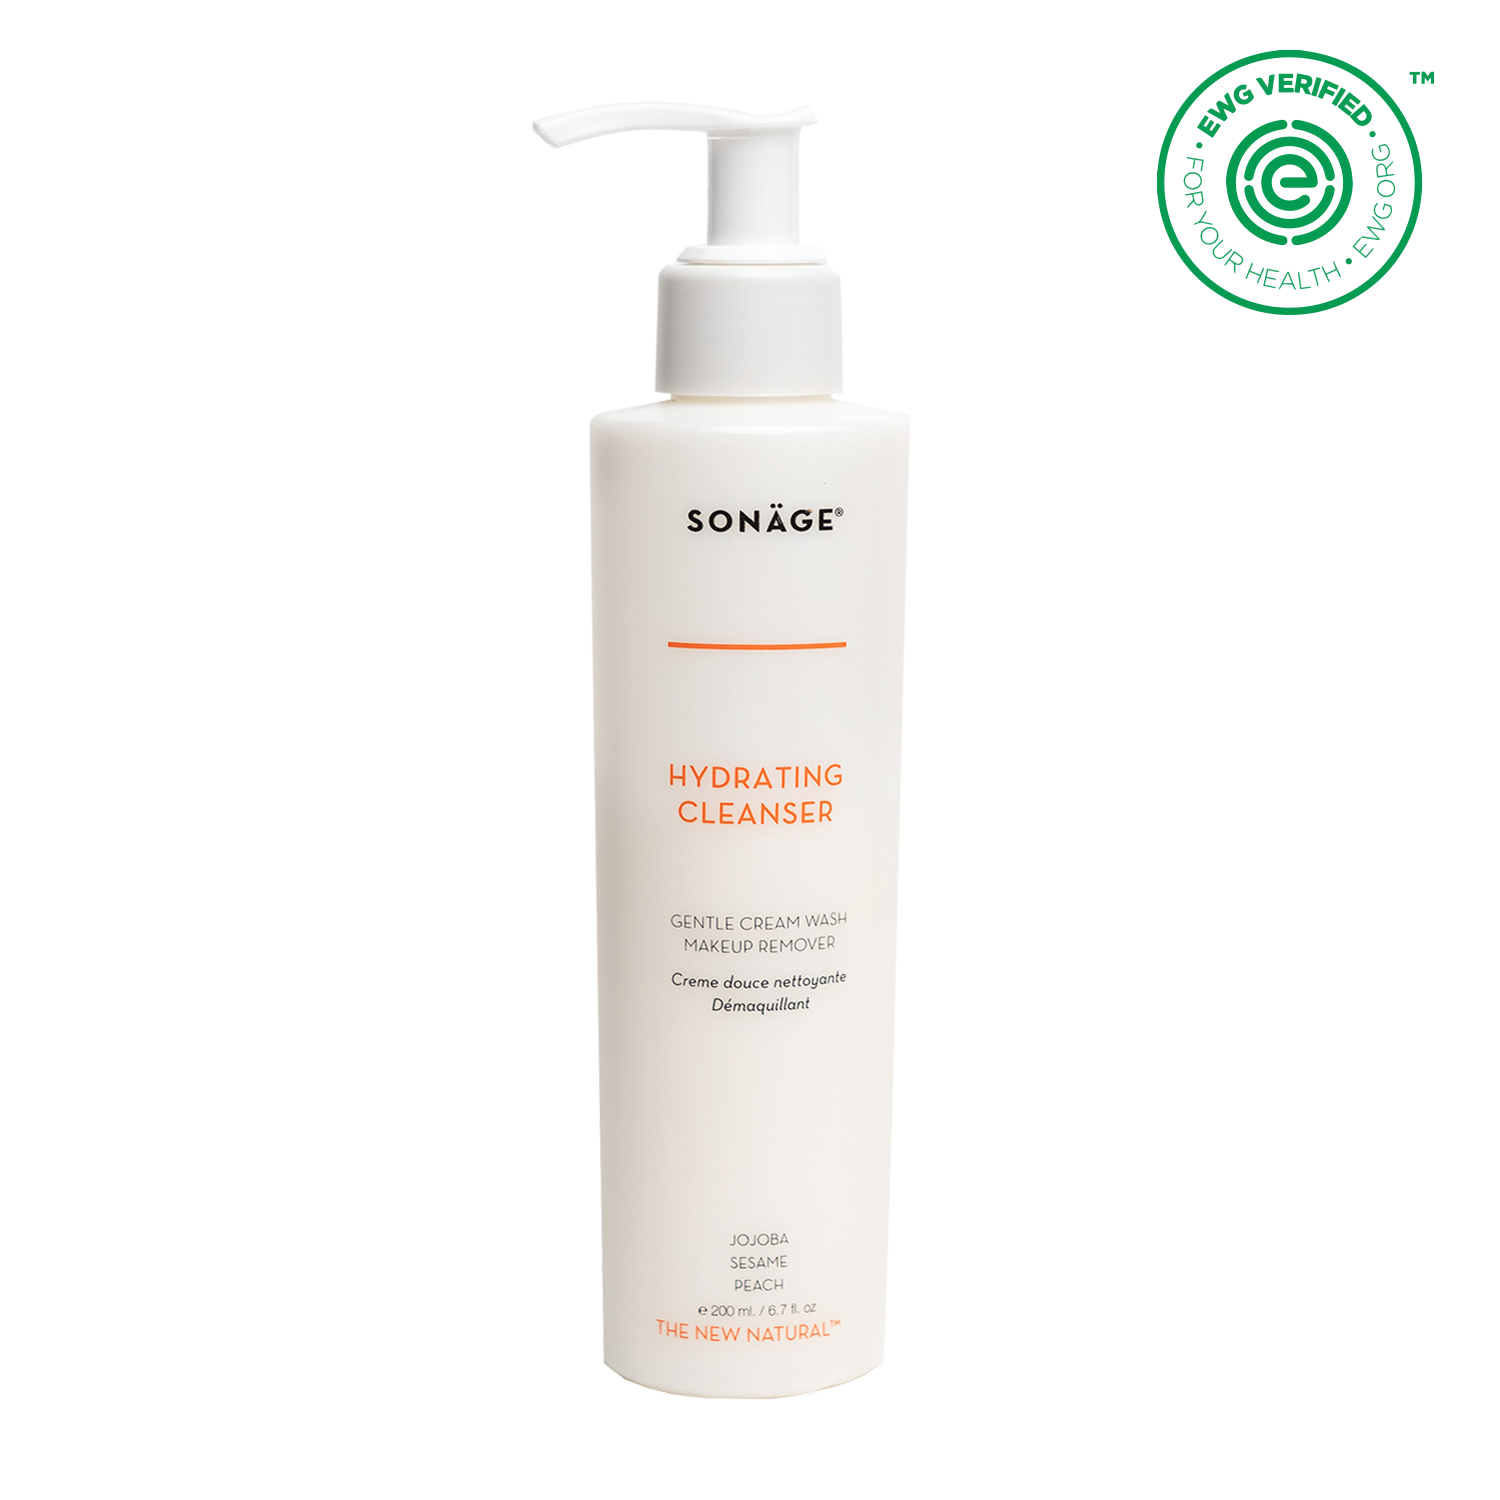 Sonage Hydrating Cleanser